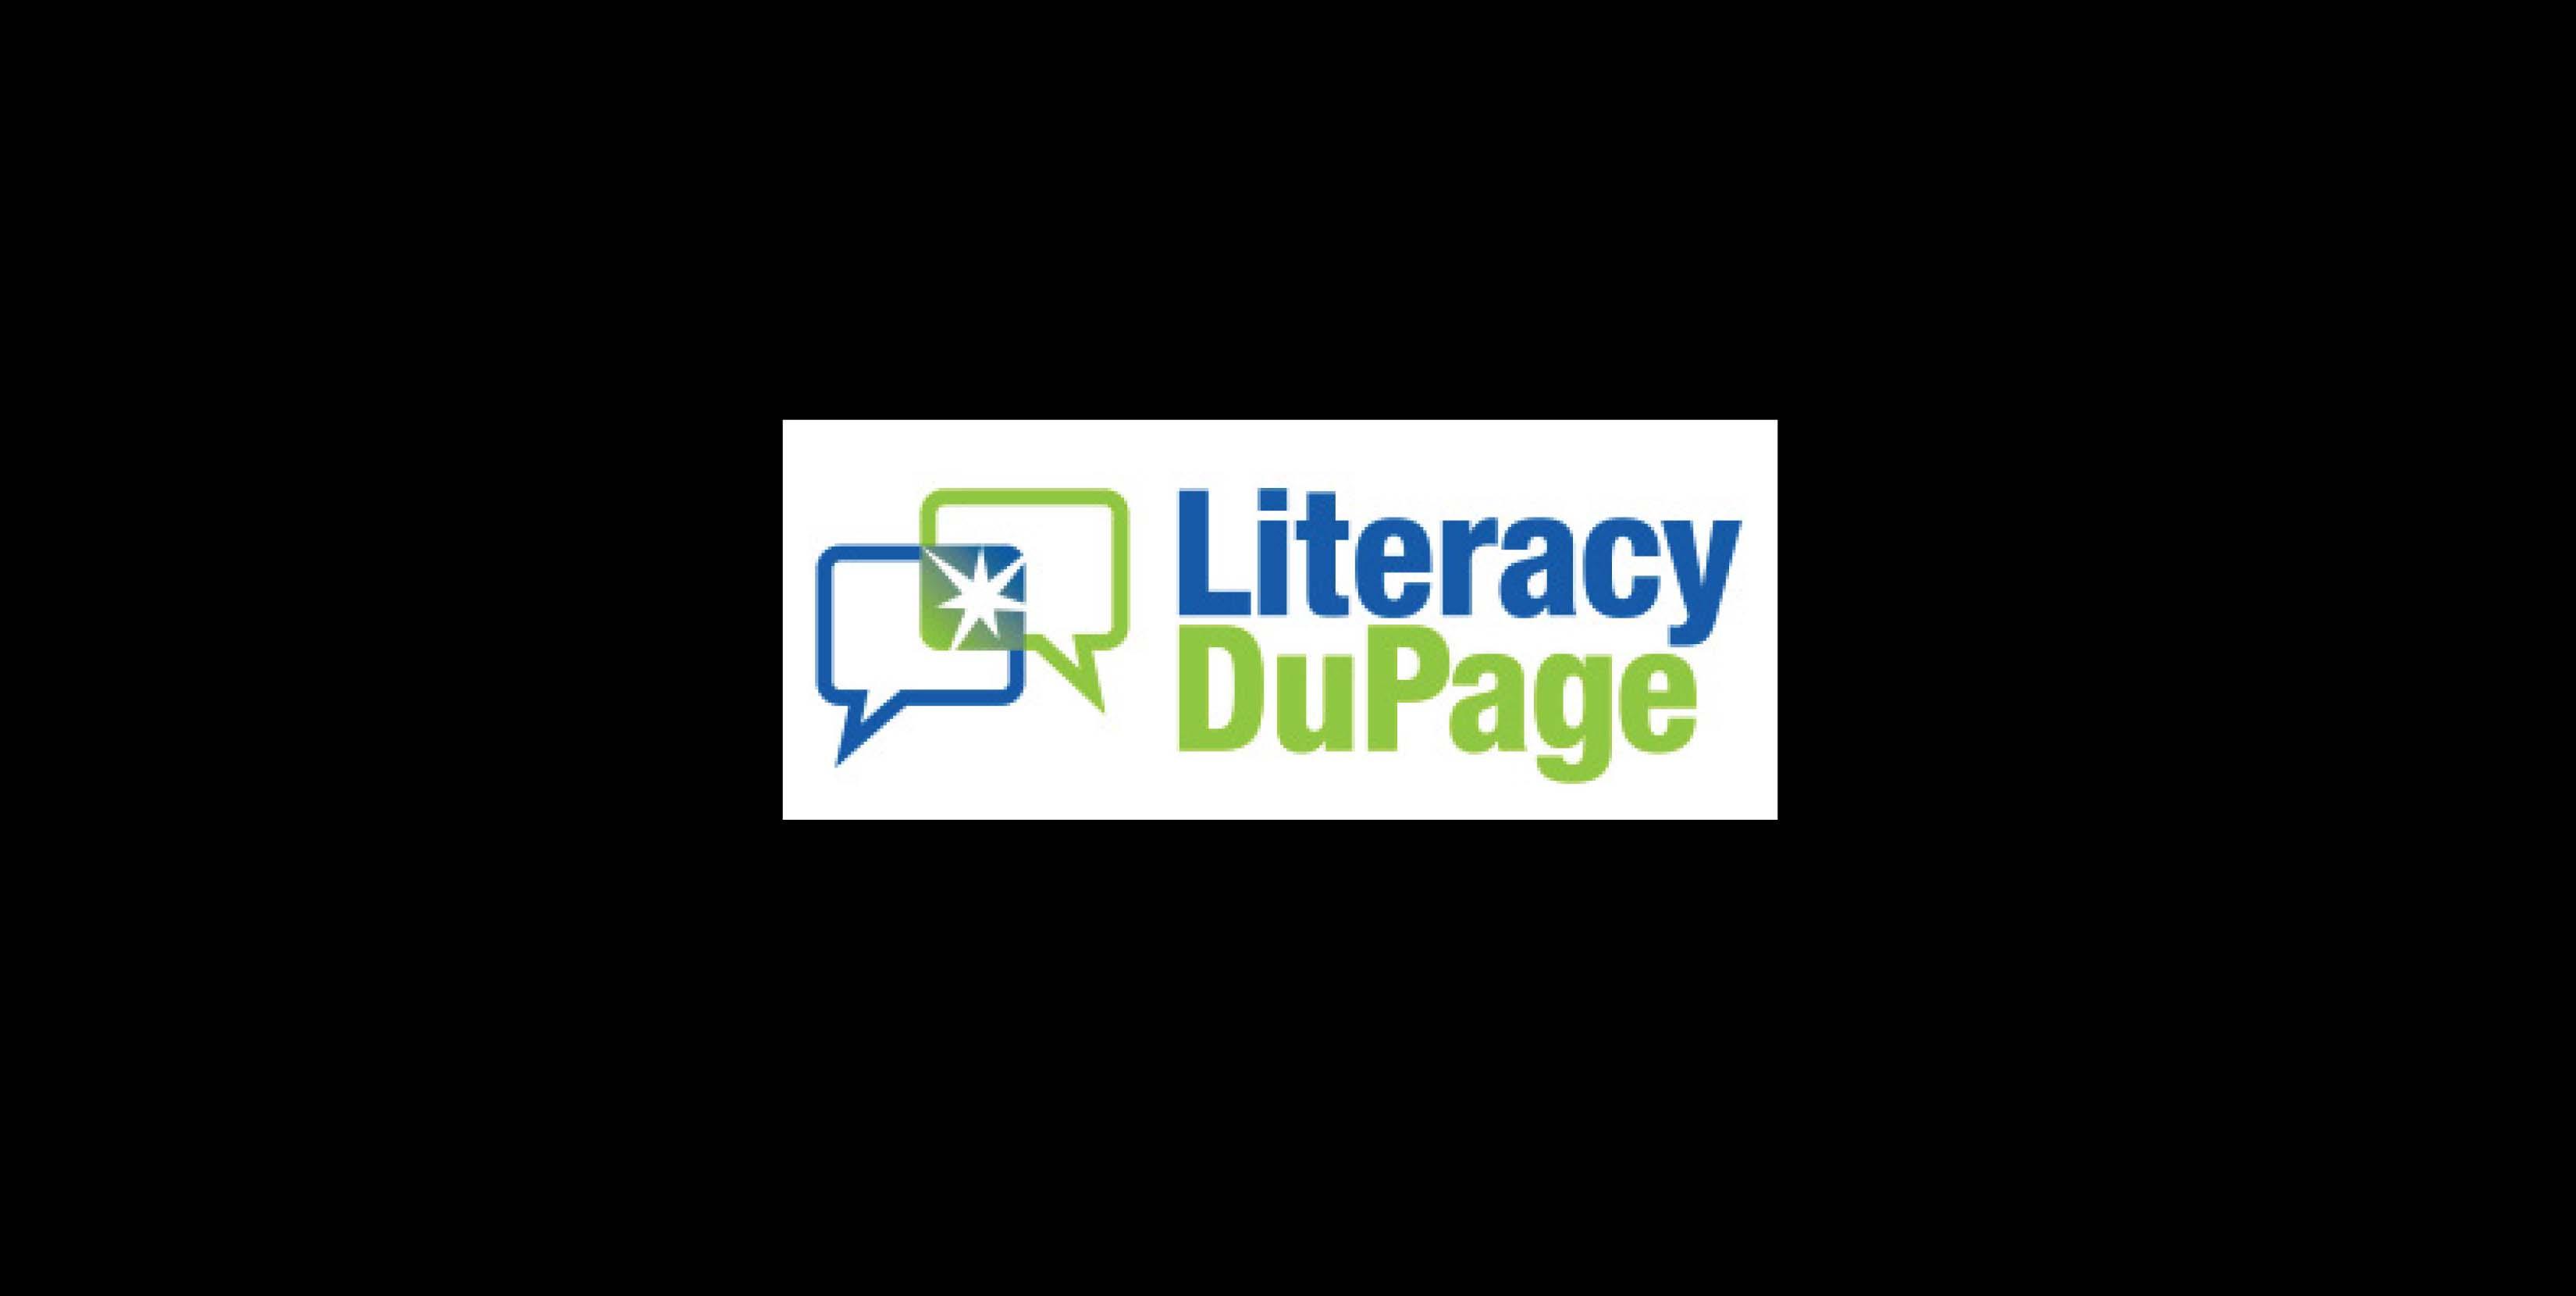 Literacy DuPage provides free English tutoring services for adults